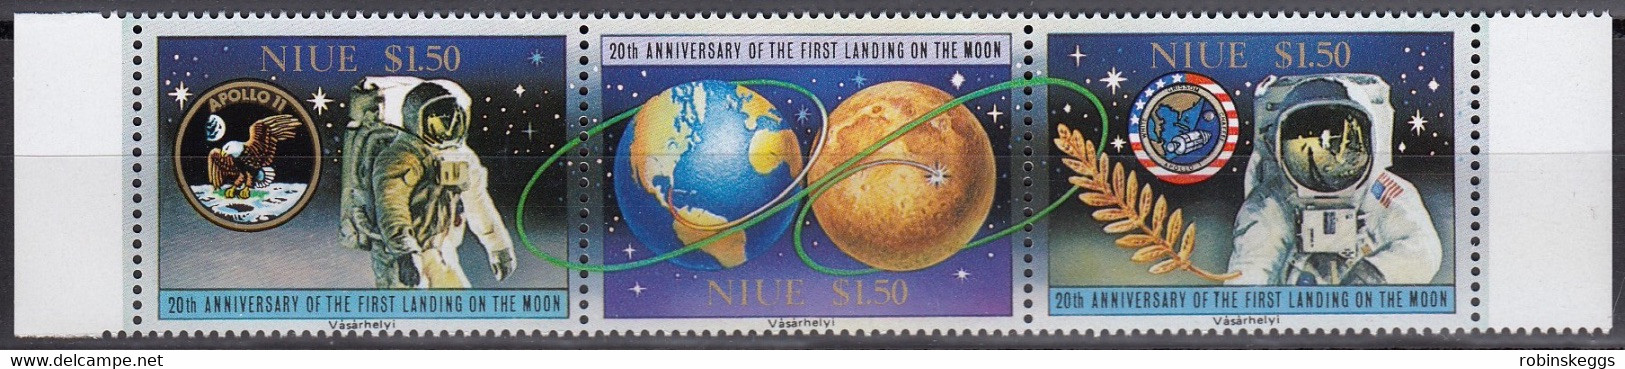 NIUE 1989 First Manned Moon Landing 20th Anniversary, Strip Of 3 MNH - Oceania